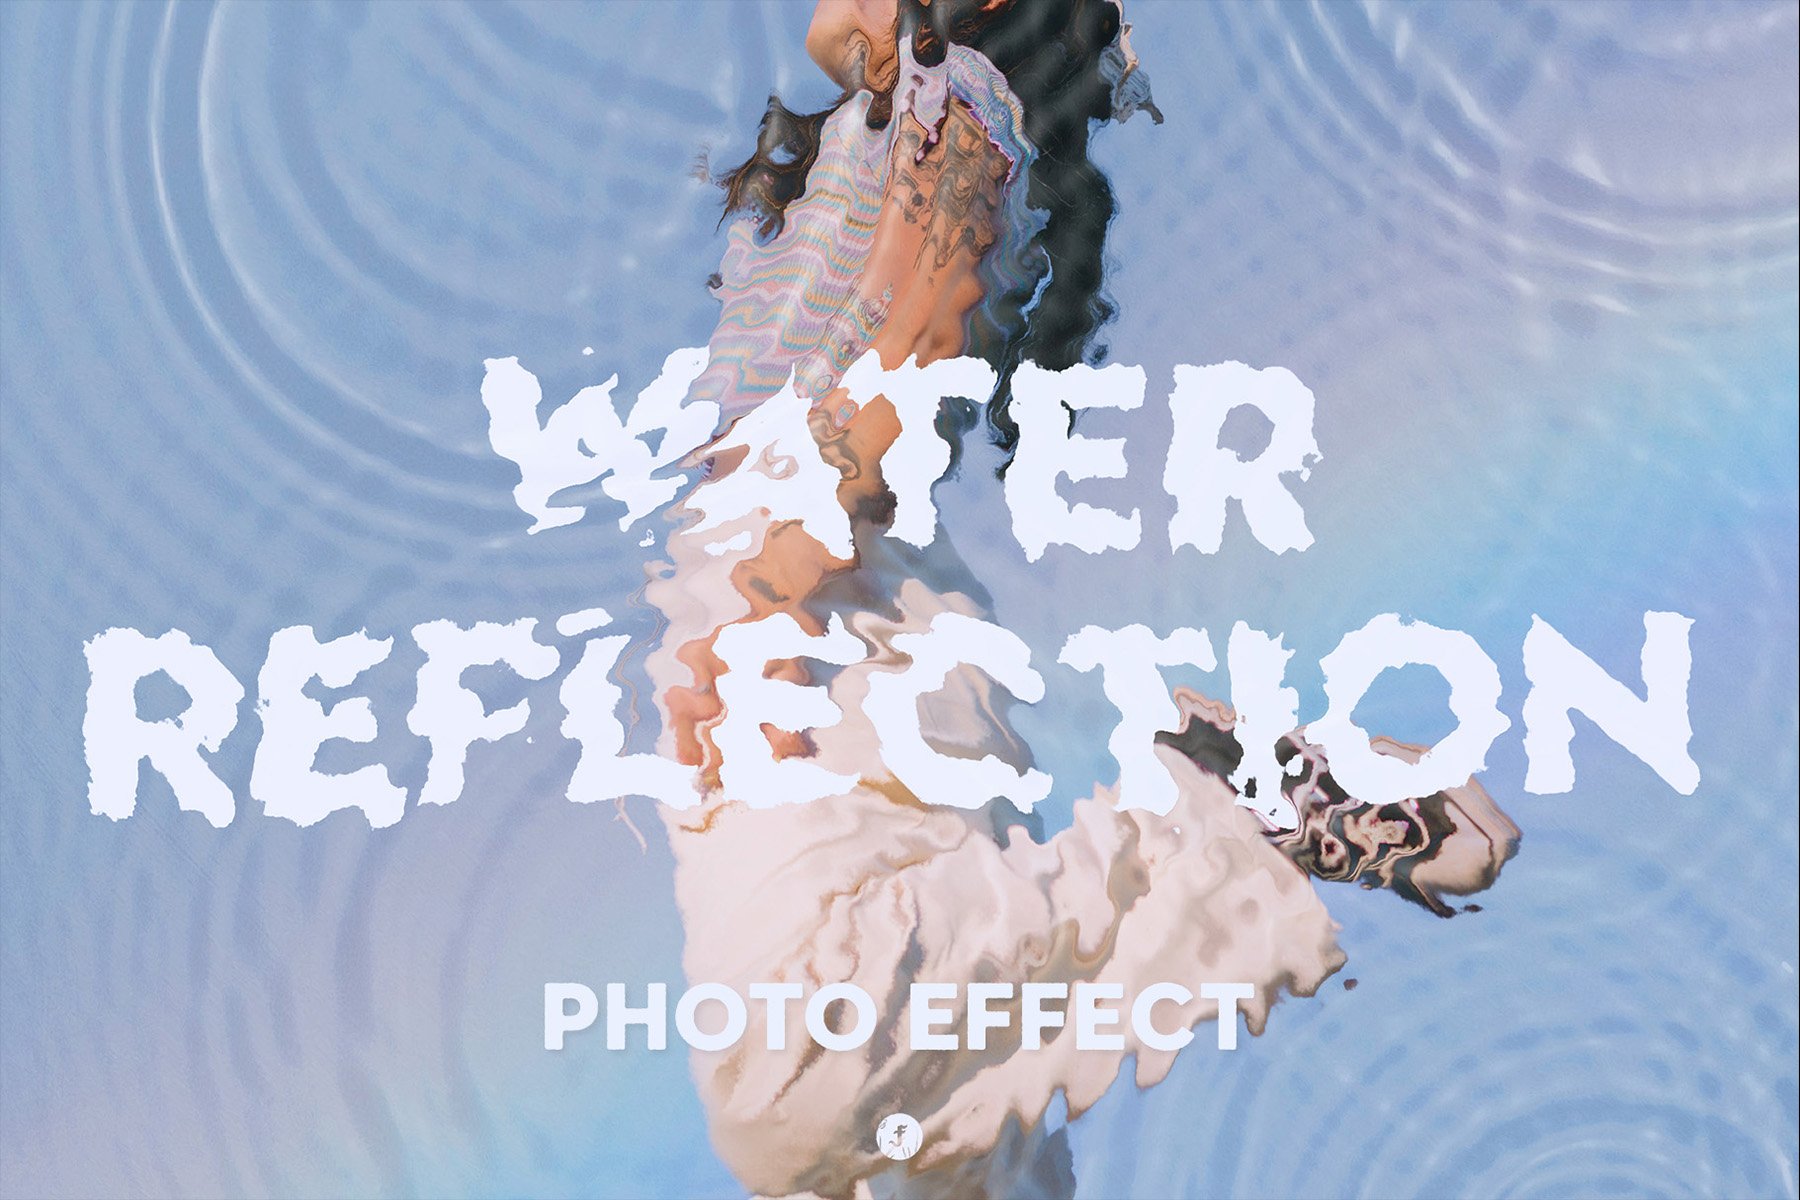 photoshop water reflection effect